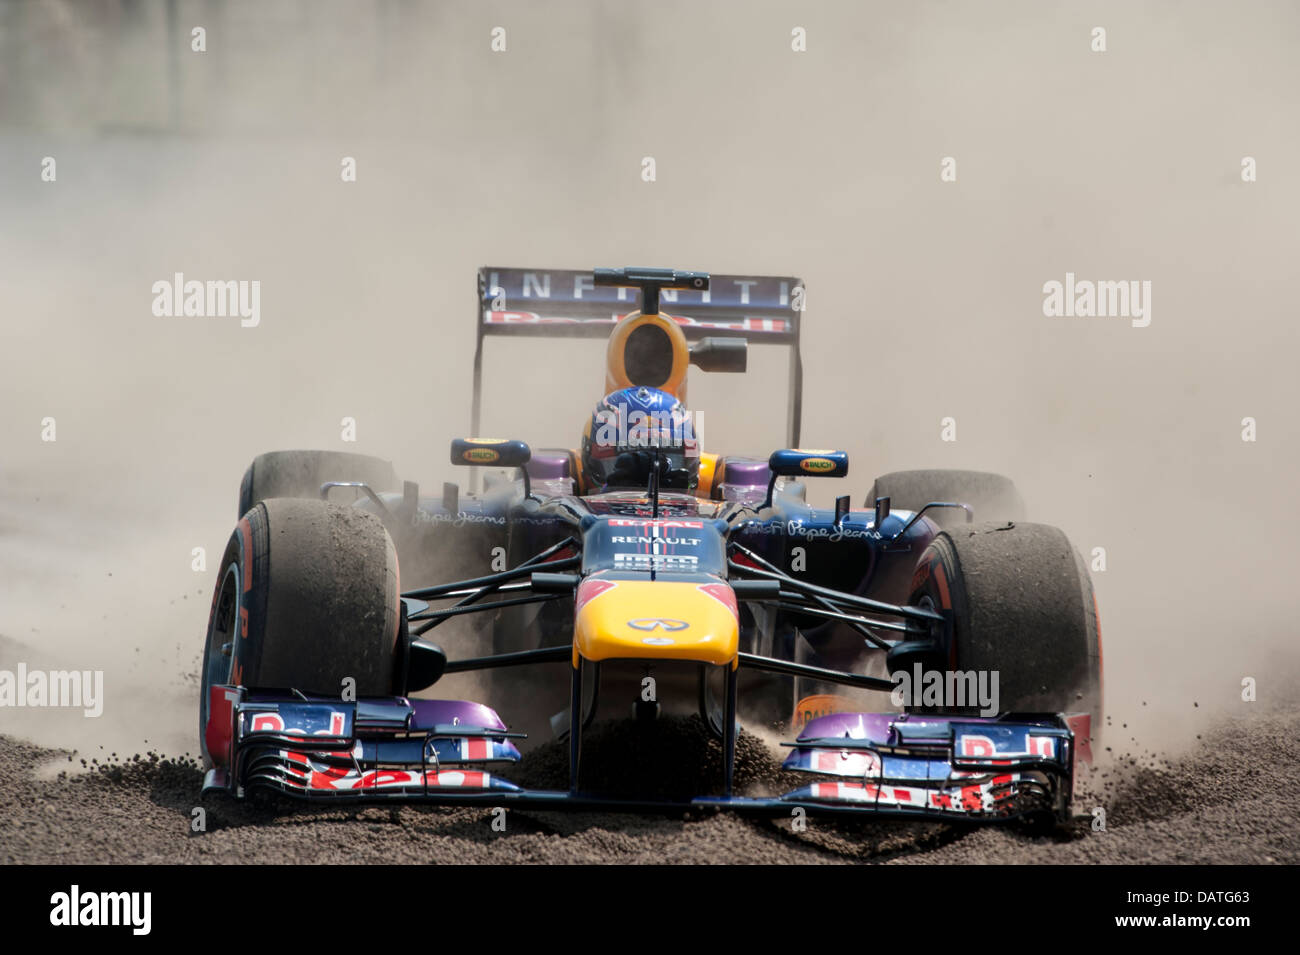 SILVERSTONE, UK - JULY 18: Daniel Ricciardo drives for Red Bull Racing during the Formula One Young Drivers Test Stock Photo